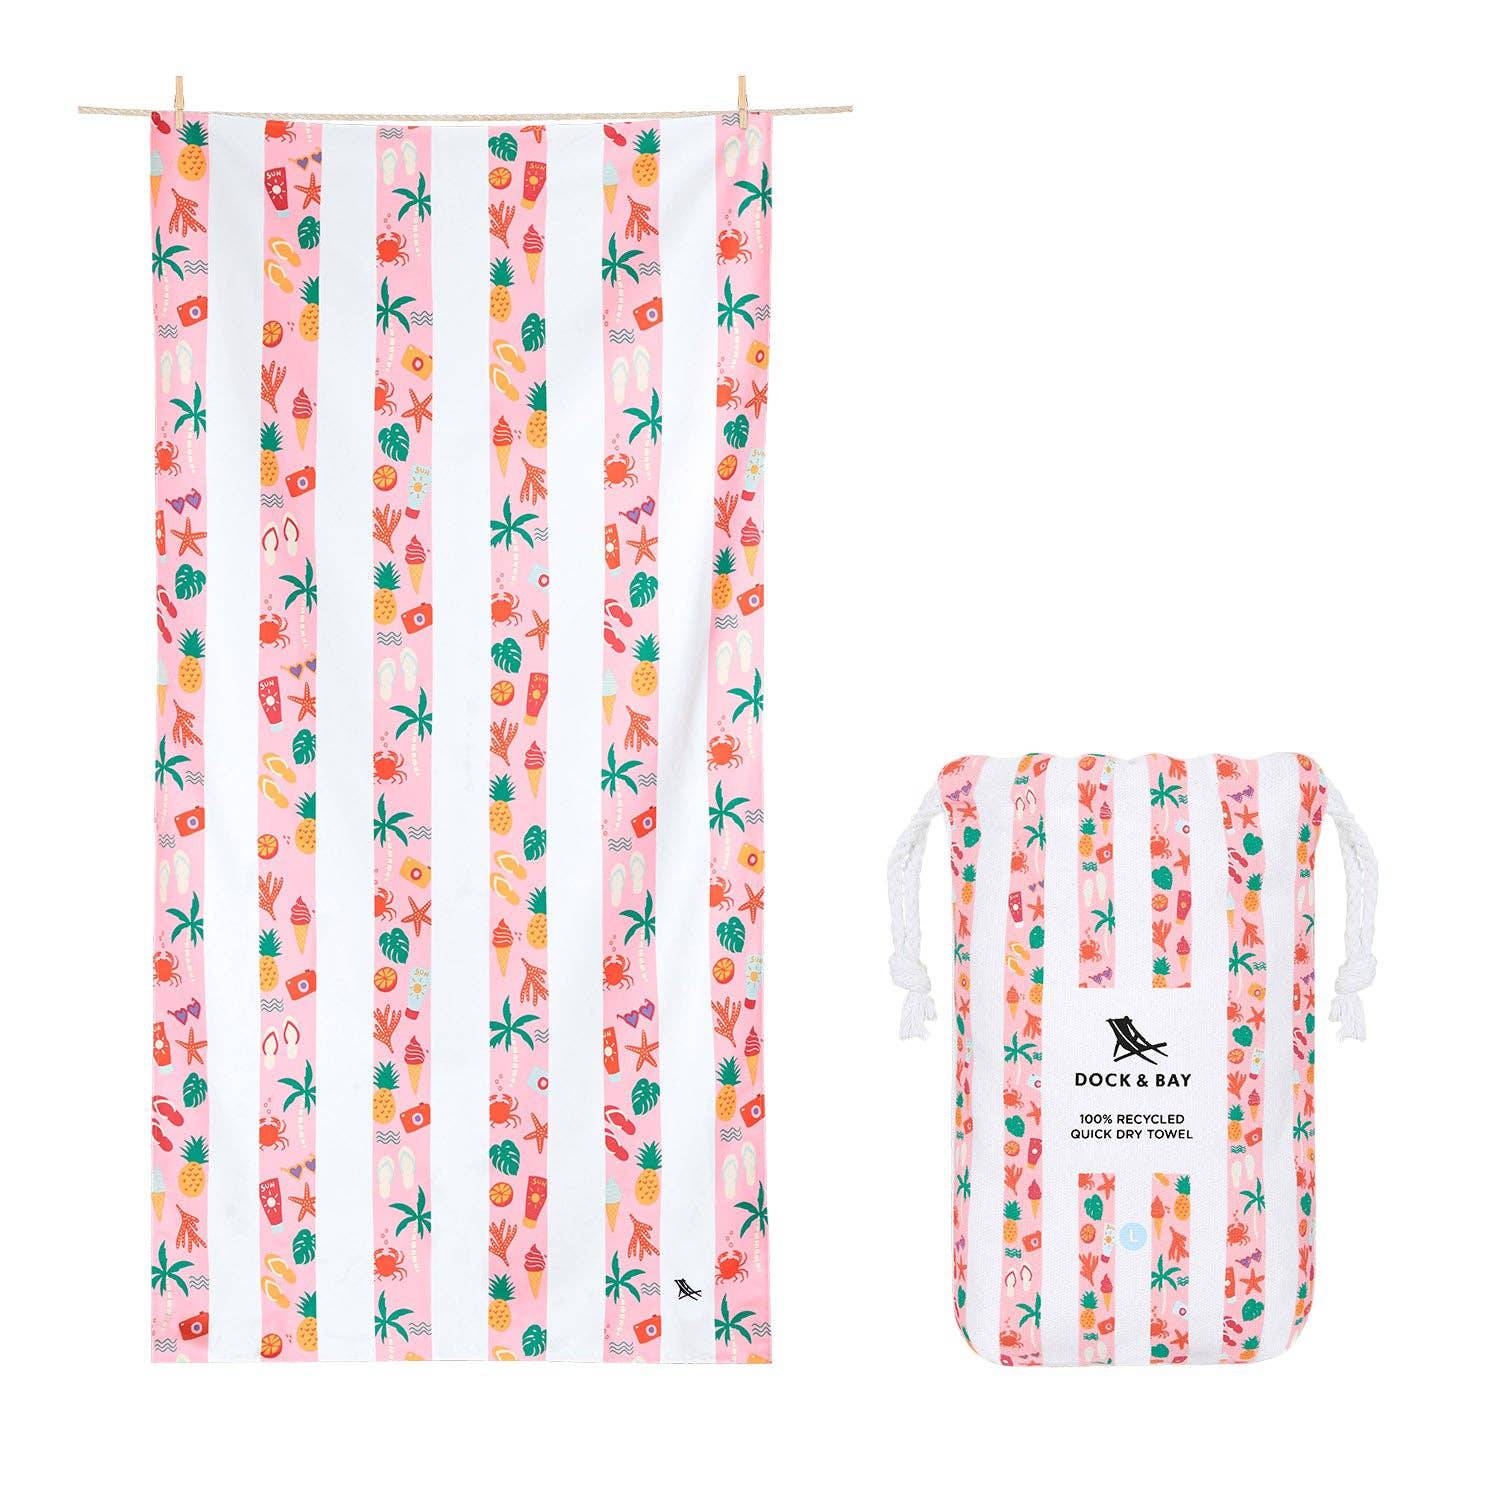 Vacay Vibes Kids Dock & Bay Quick Dry Towel - 2 sizes - The Preppy Bunny